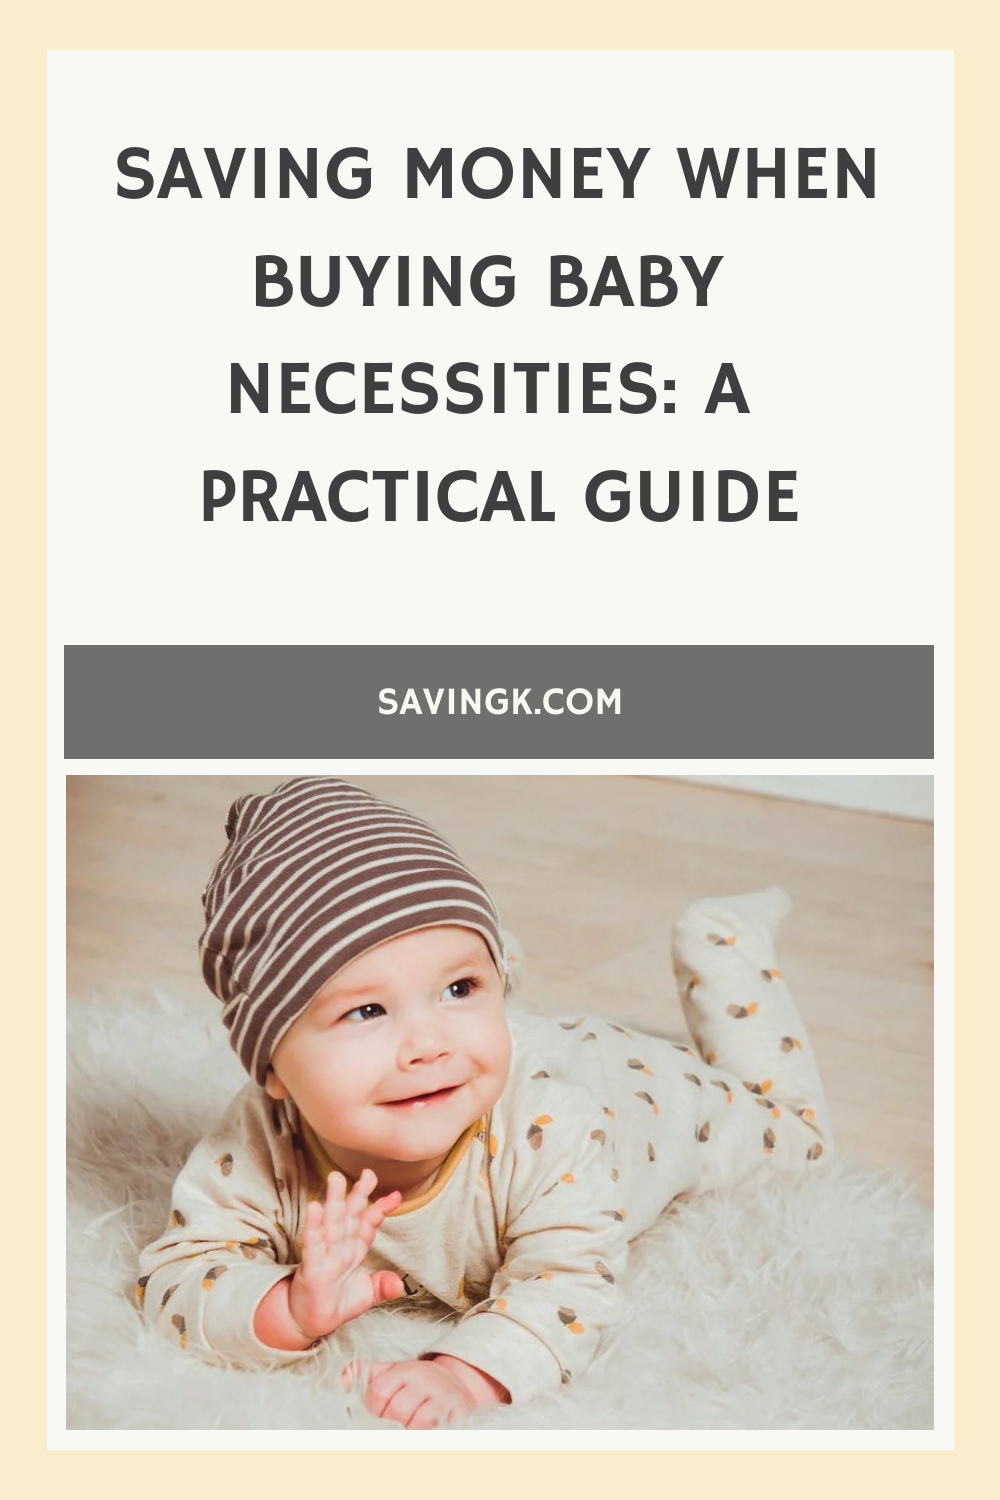 Saving Money When Buying Baby Necessities: A Practical Guide